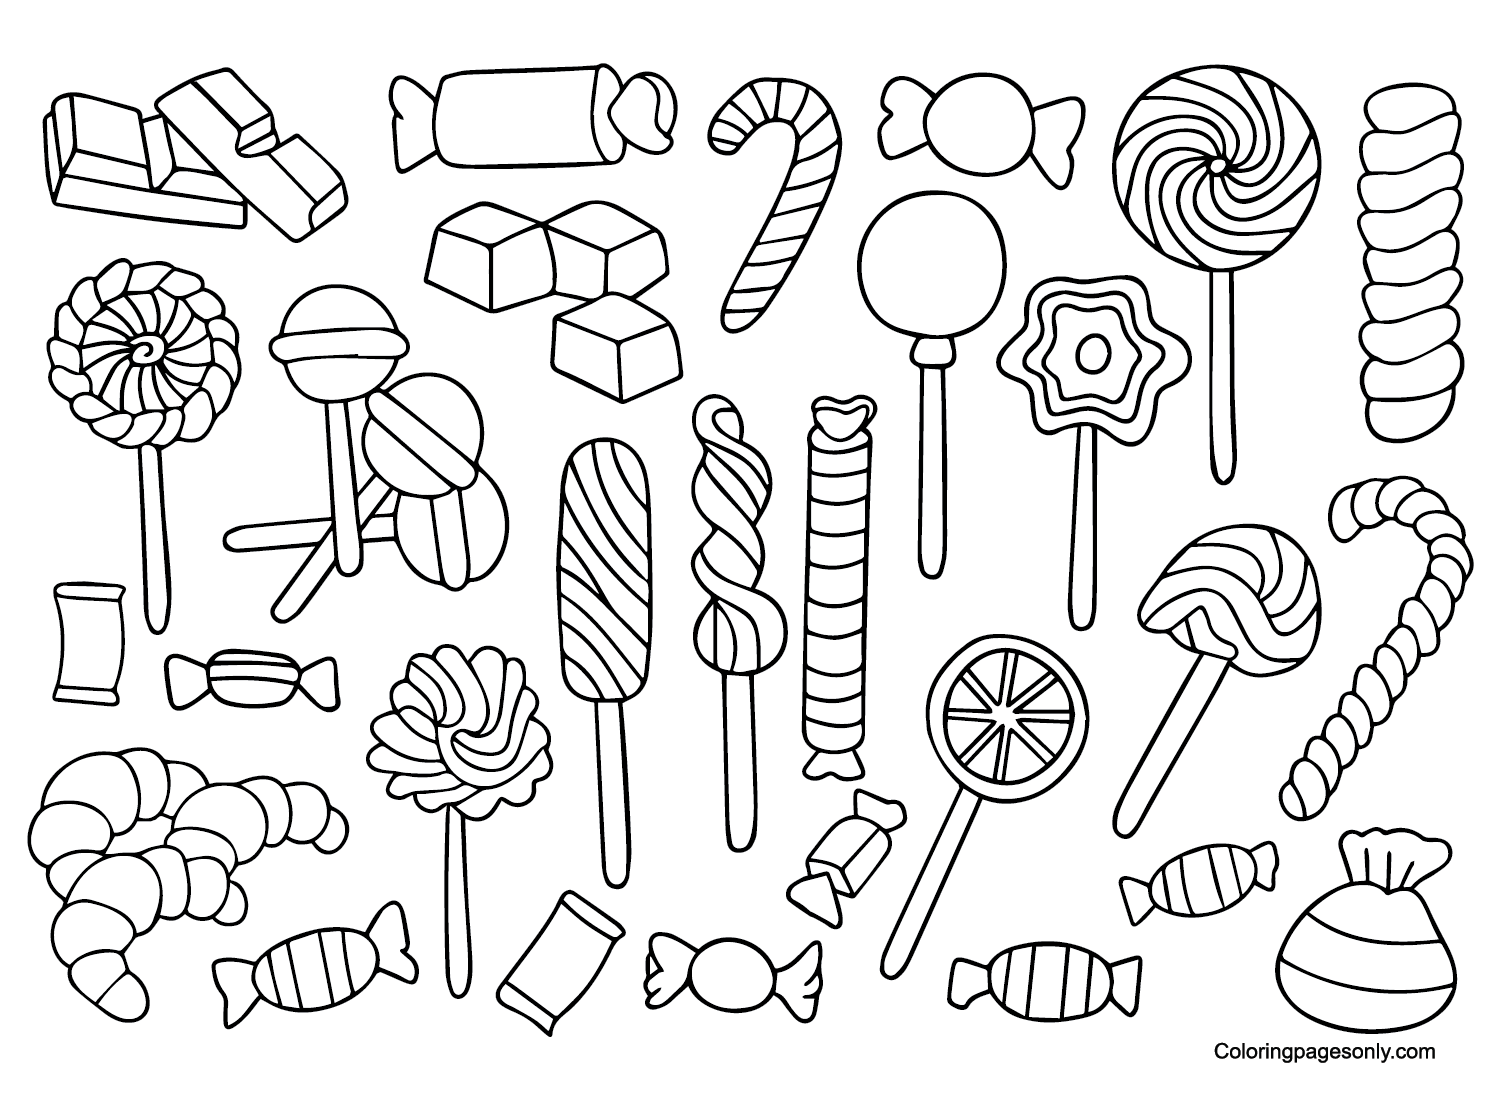 Candyland for Kids Coloring Page